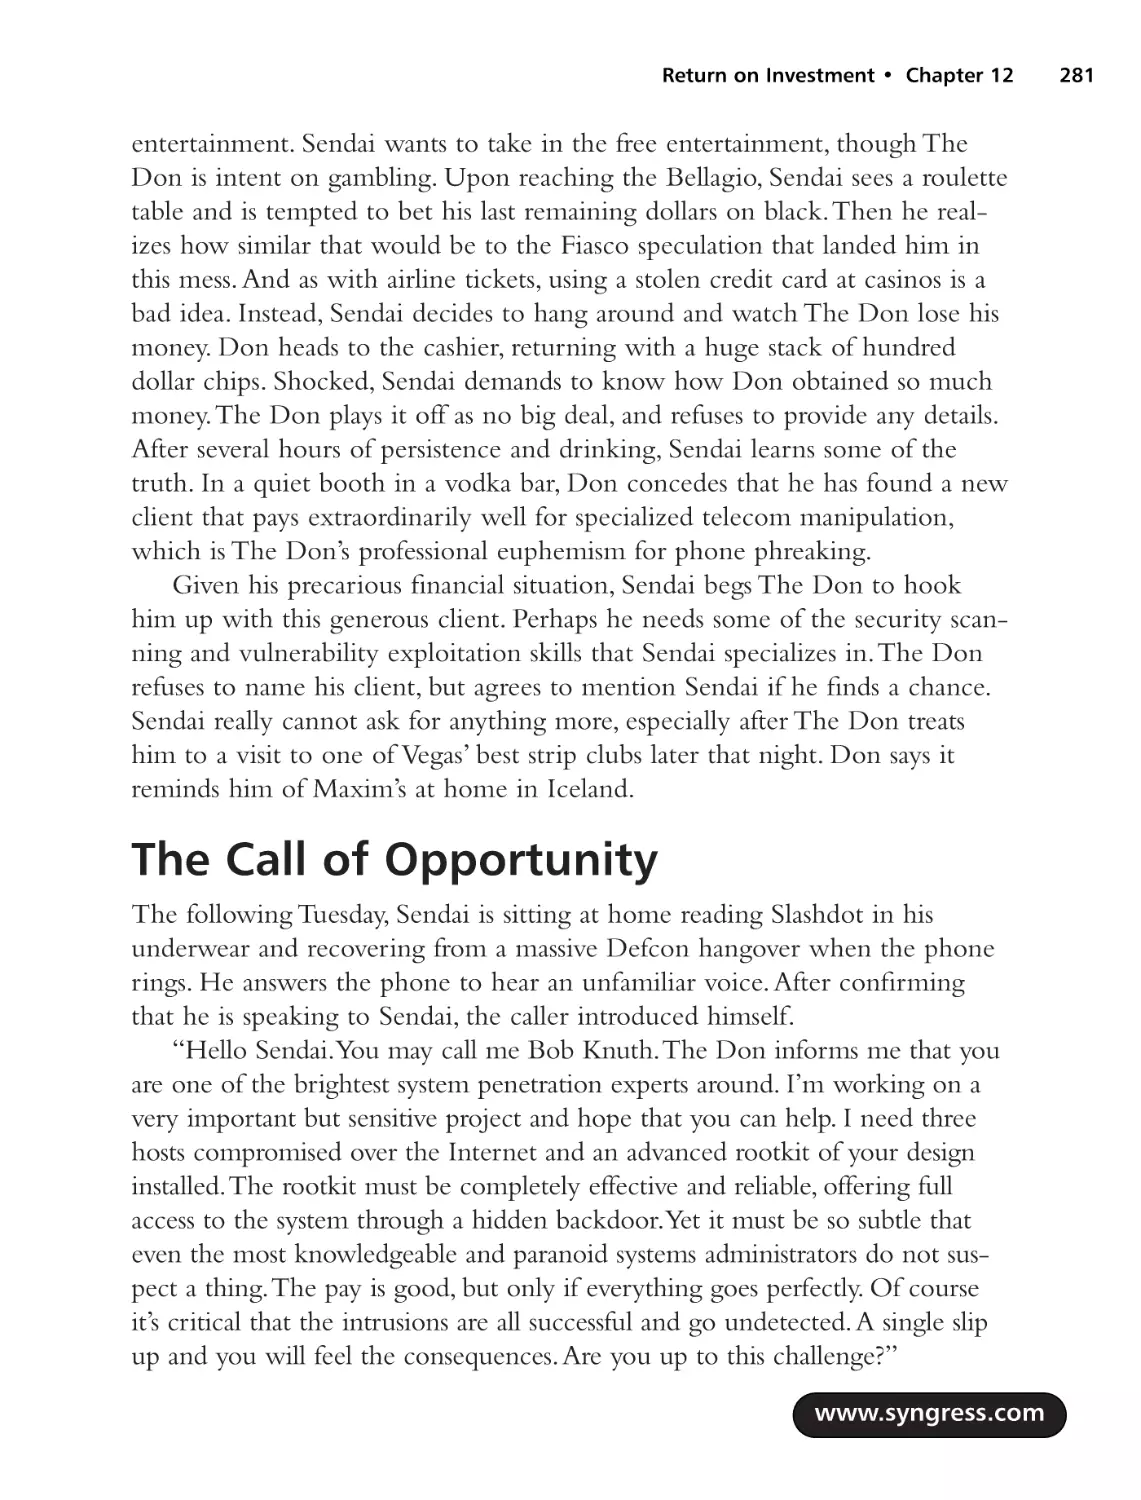 The Call of Opportunity